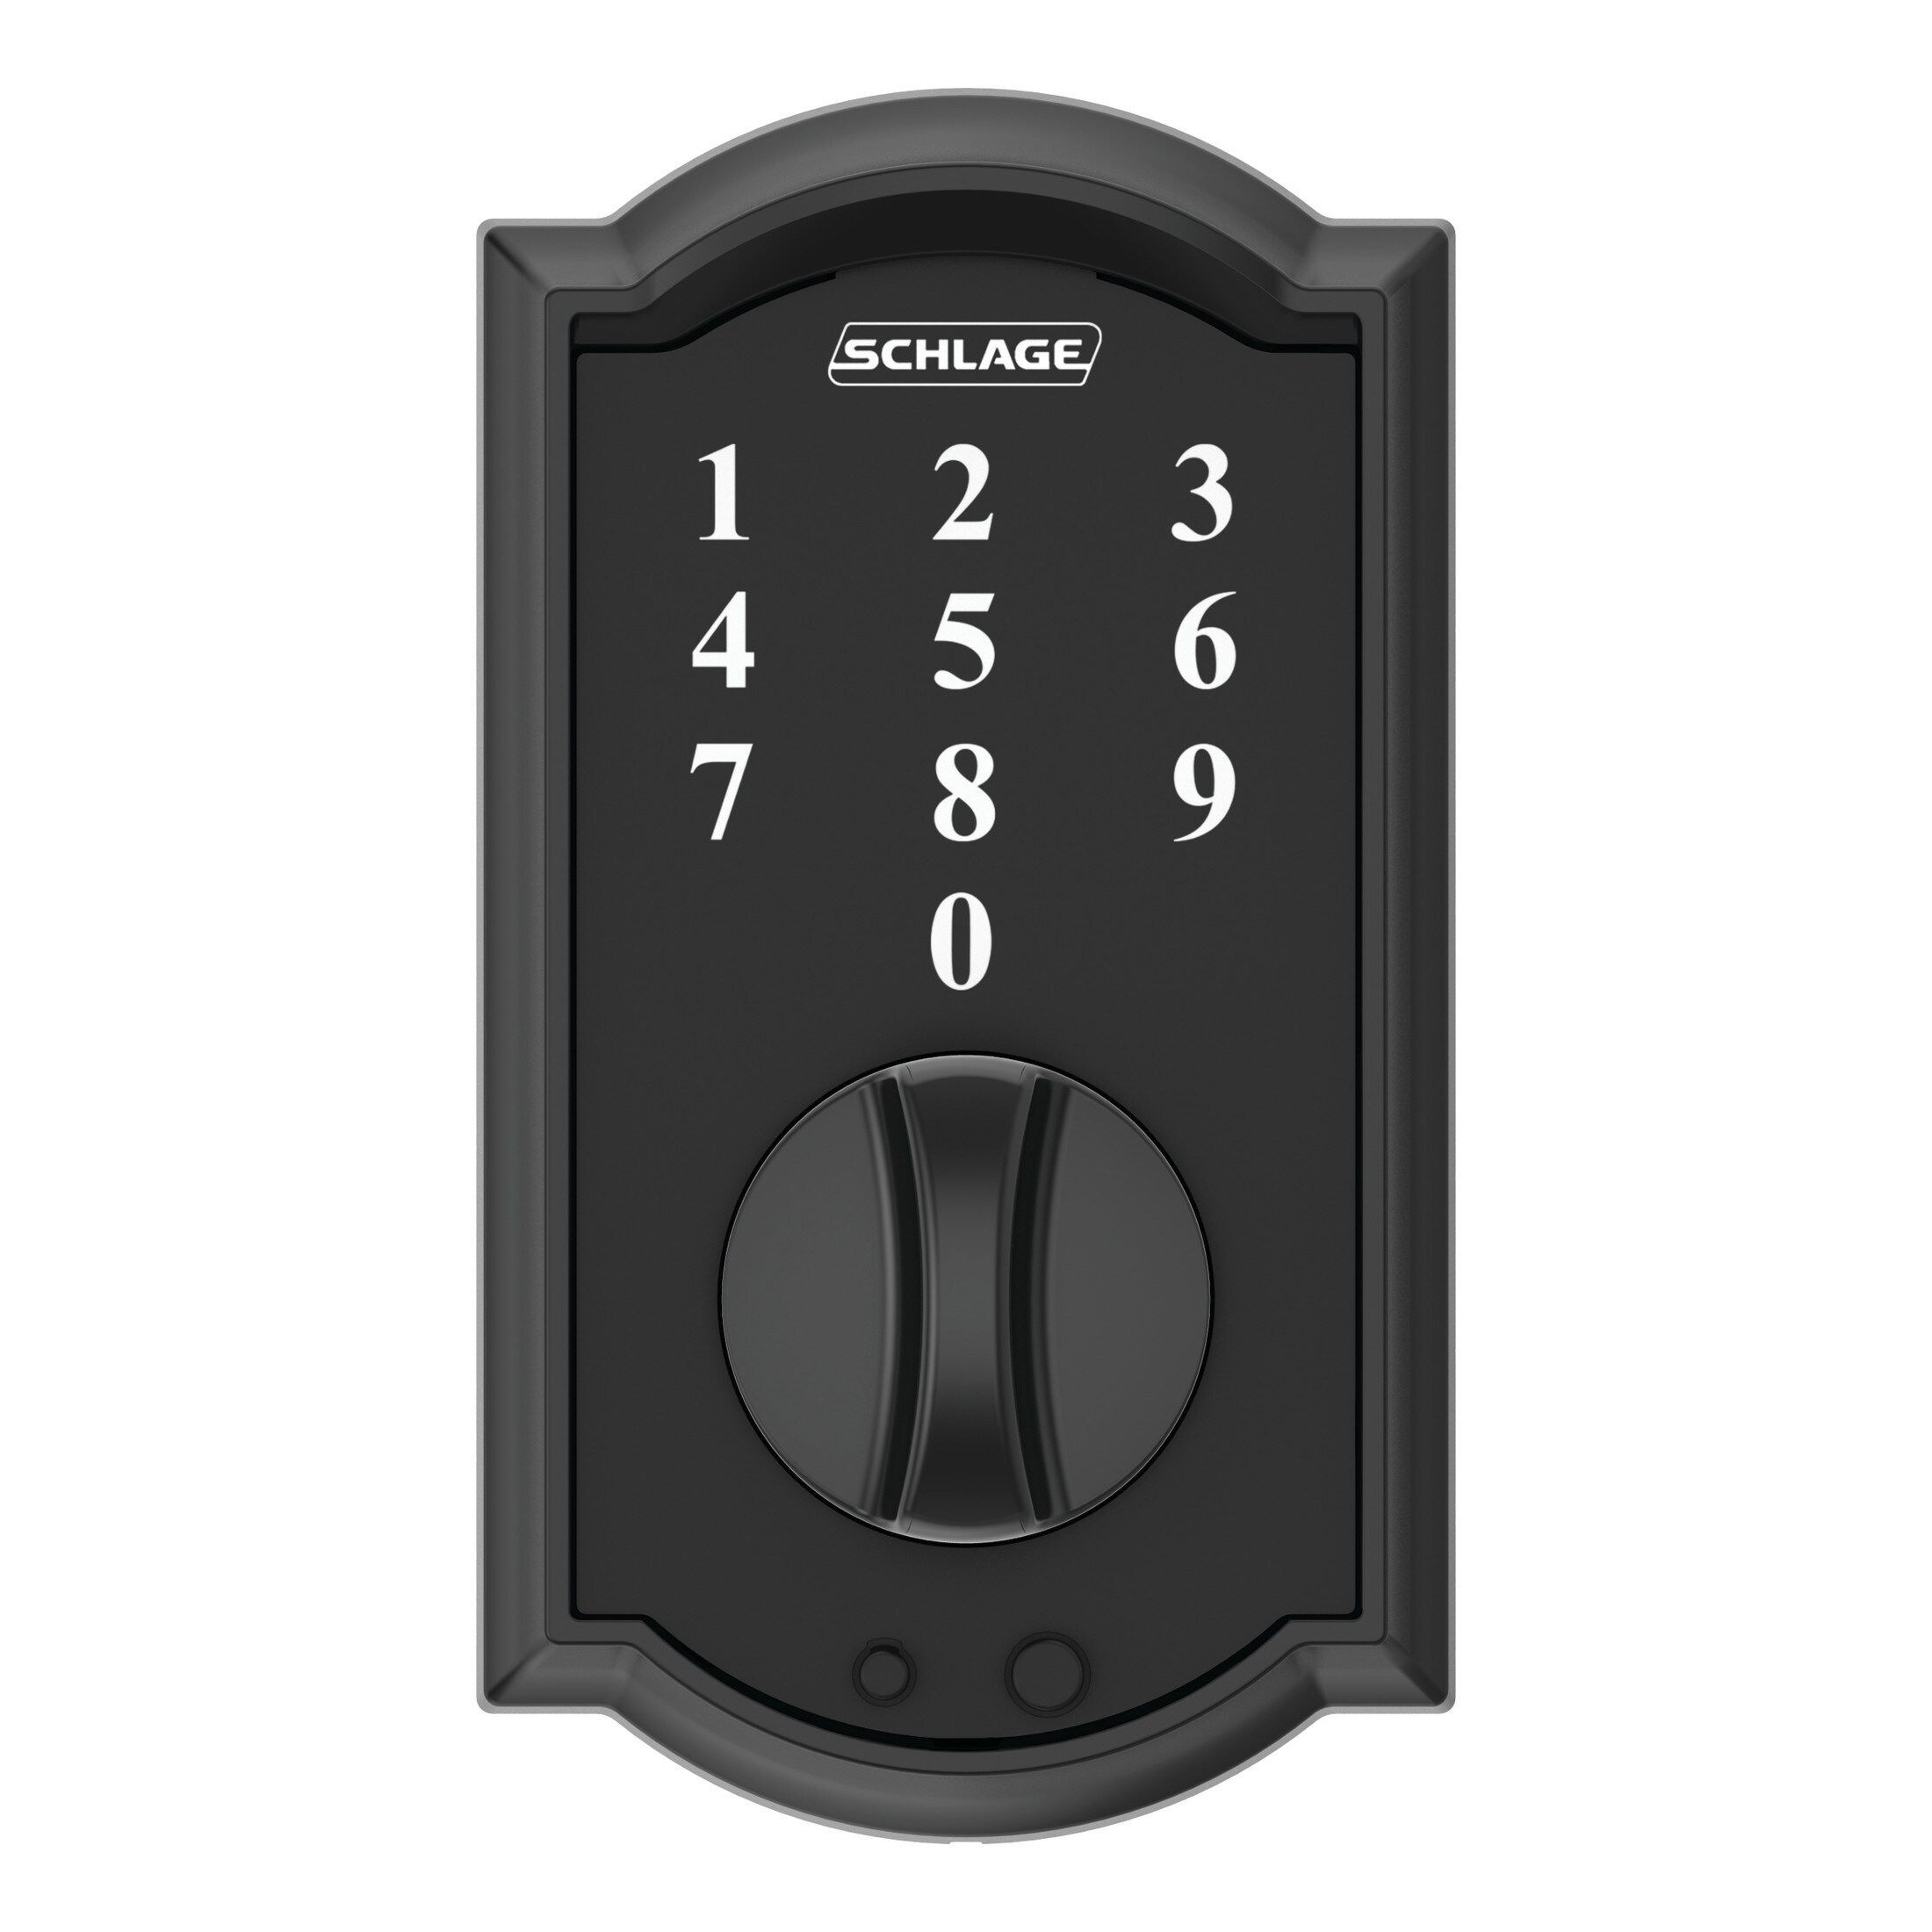 What a Schlage Warranty means to you.